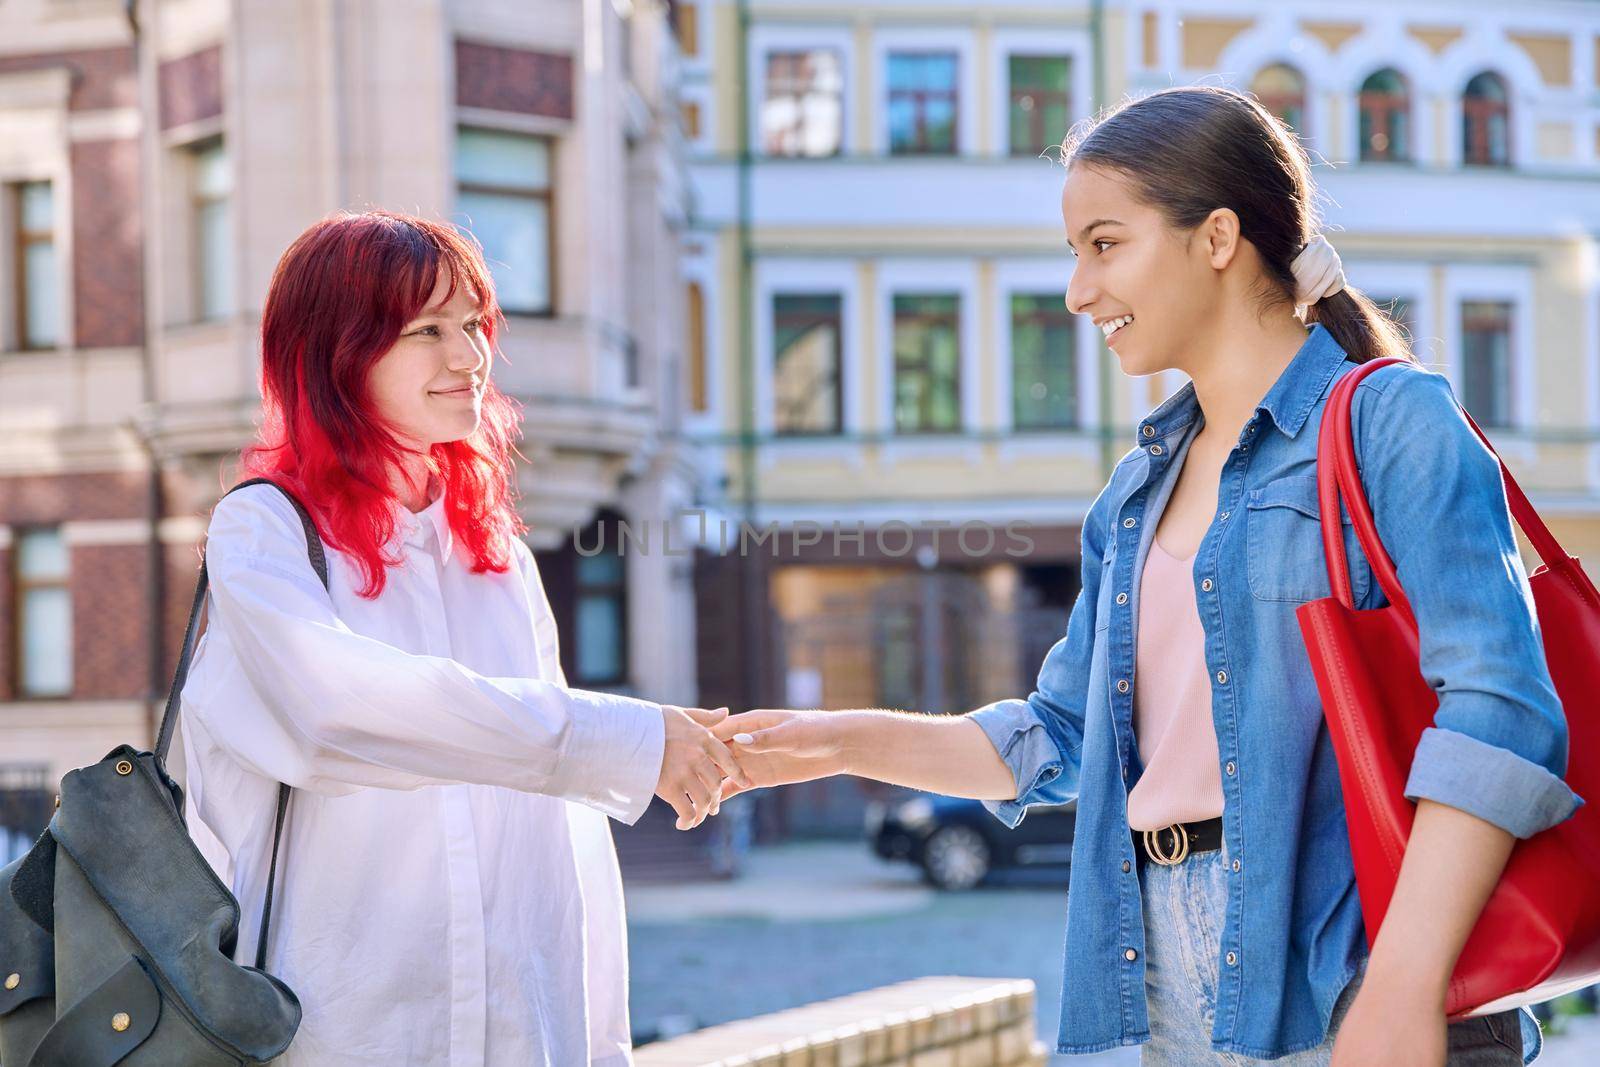 Meeting of two teenage girls friends, outdoor on the city street by VH-studio